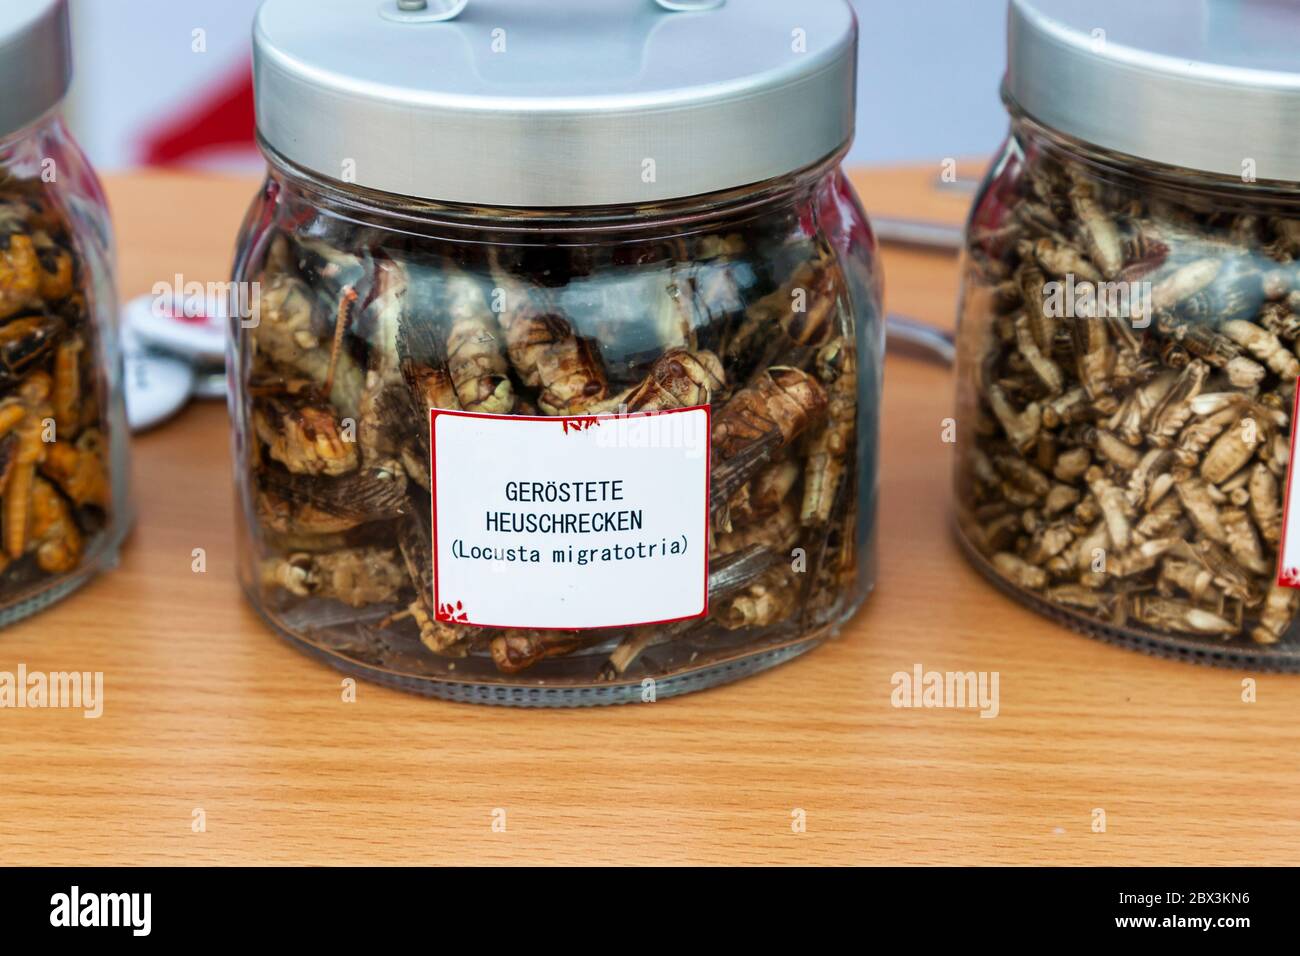 Roasted grasshoppers (Locusta migratoria) in jar. Delicatessen made of Insects in Cologne, Germany Stock Photo